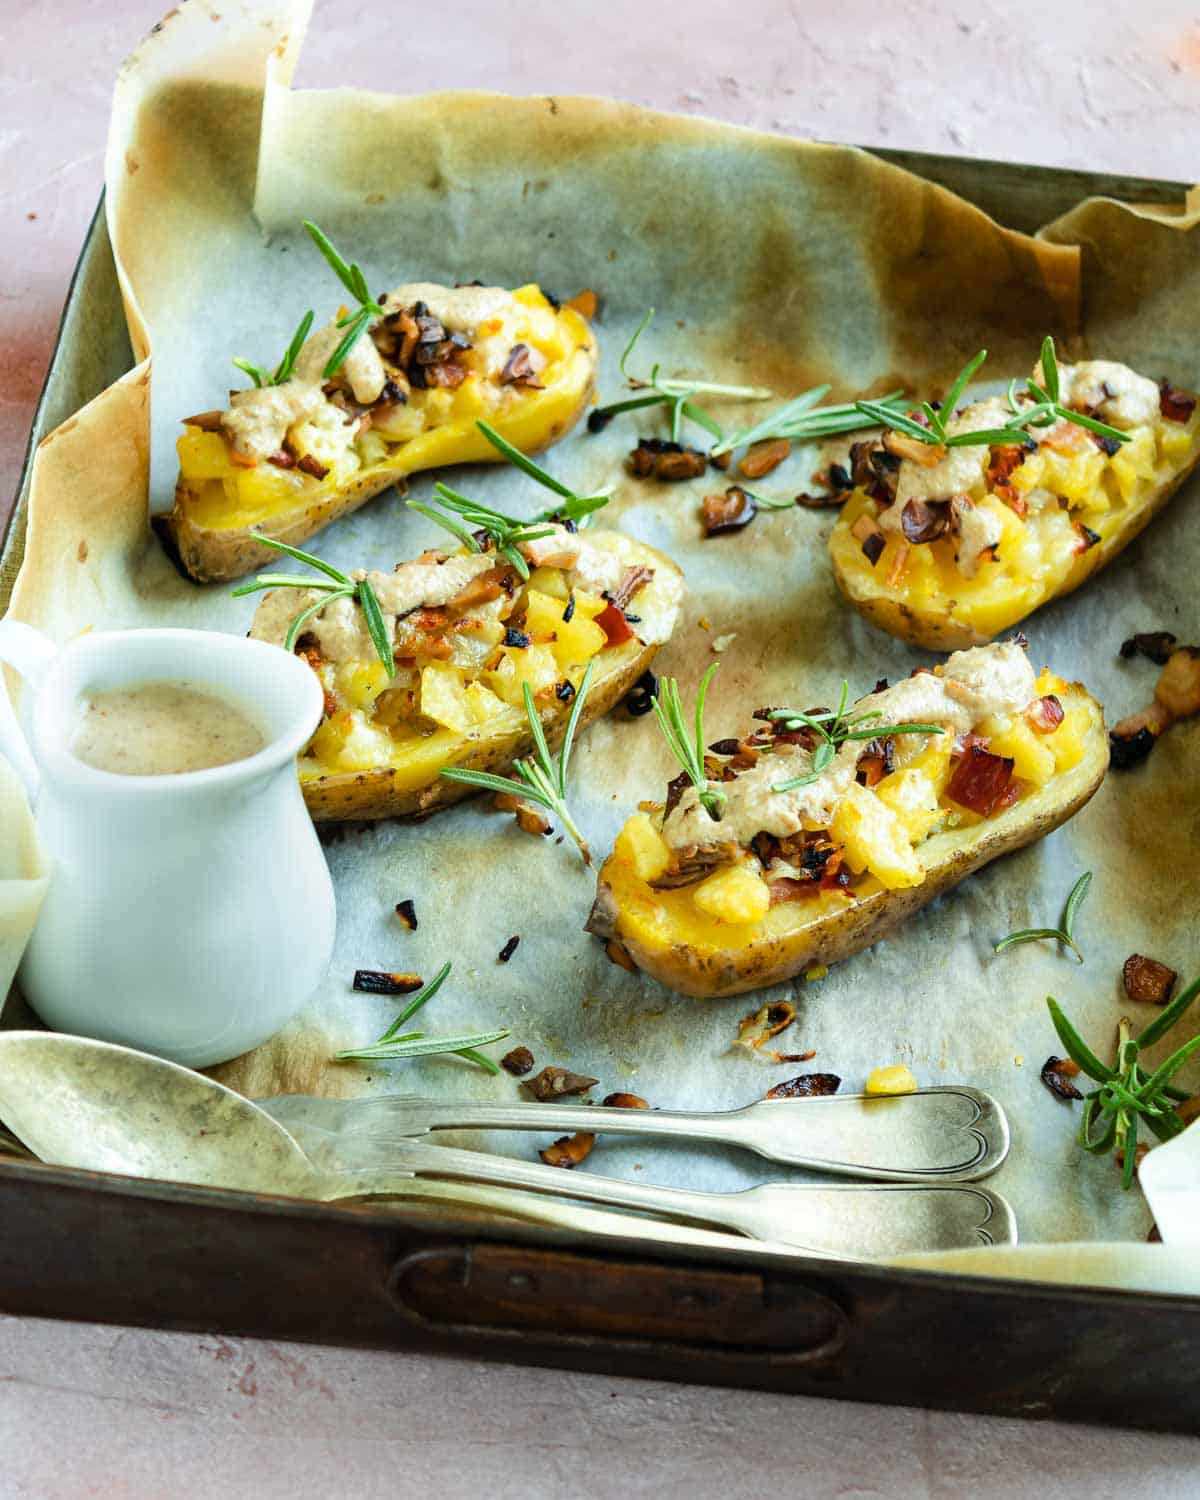 4 half cut potato filled with mushrooms cheese and bacon on a baking tray with parchment paper. A white bowl with cheese cream and forks and spoon on the left